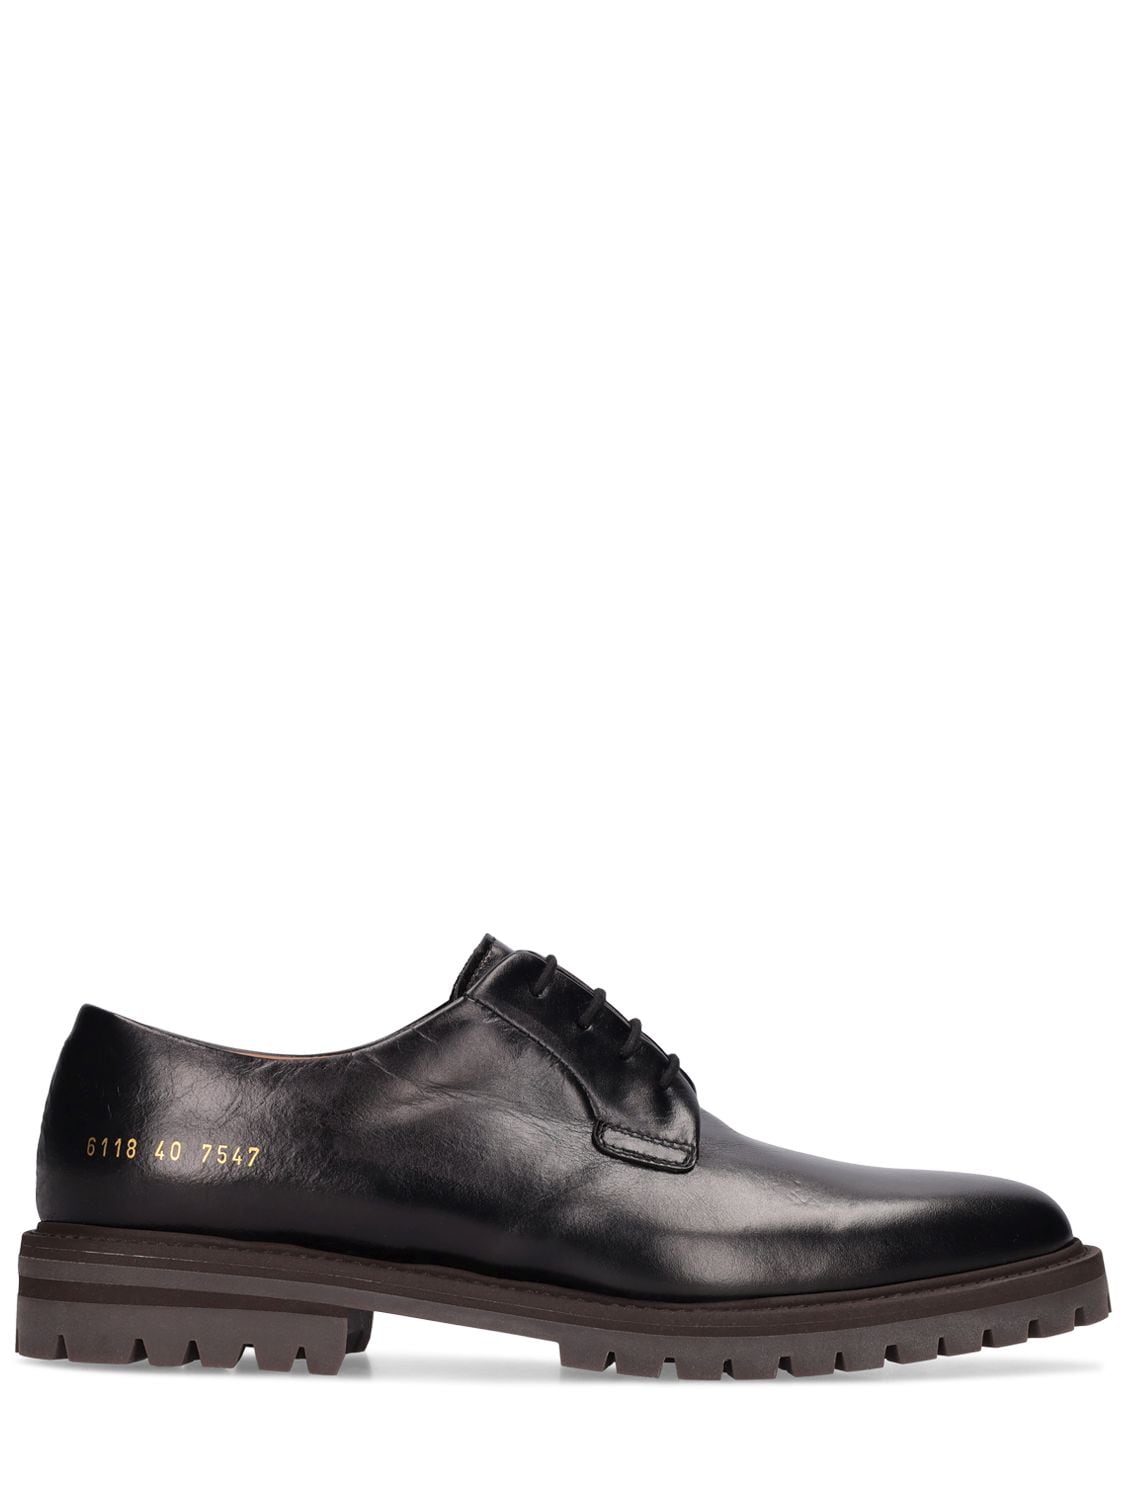 Derby Oxford Shoes